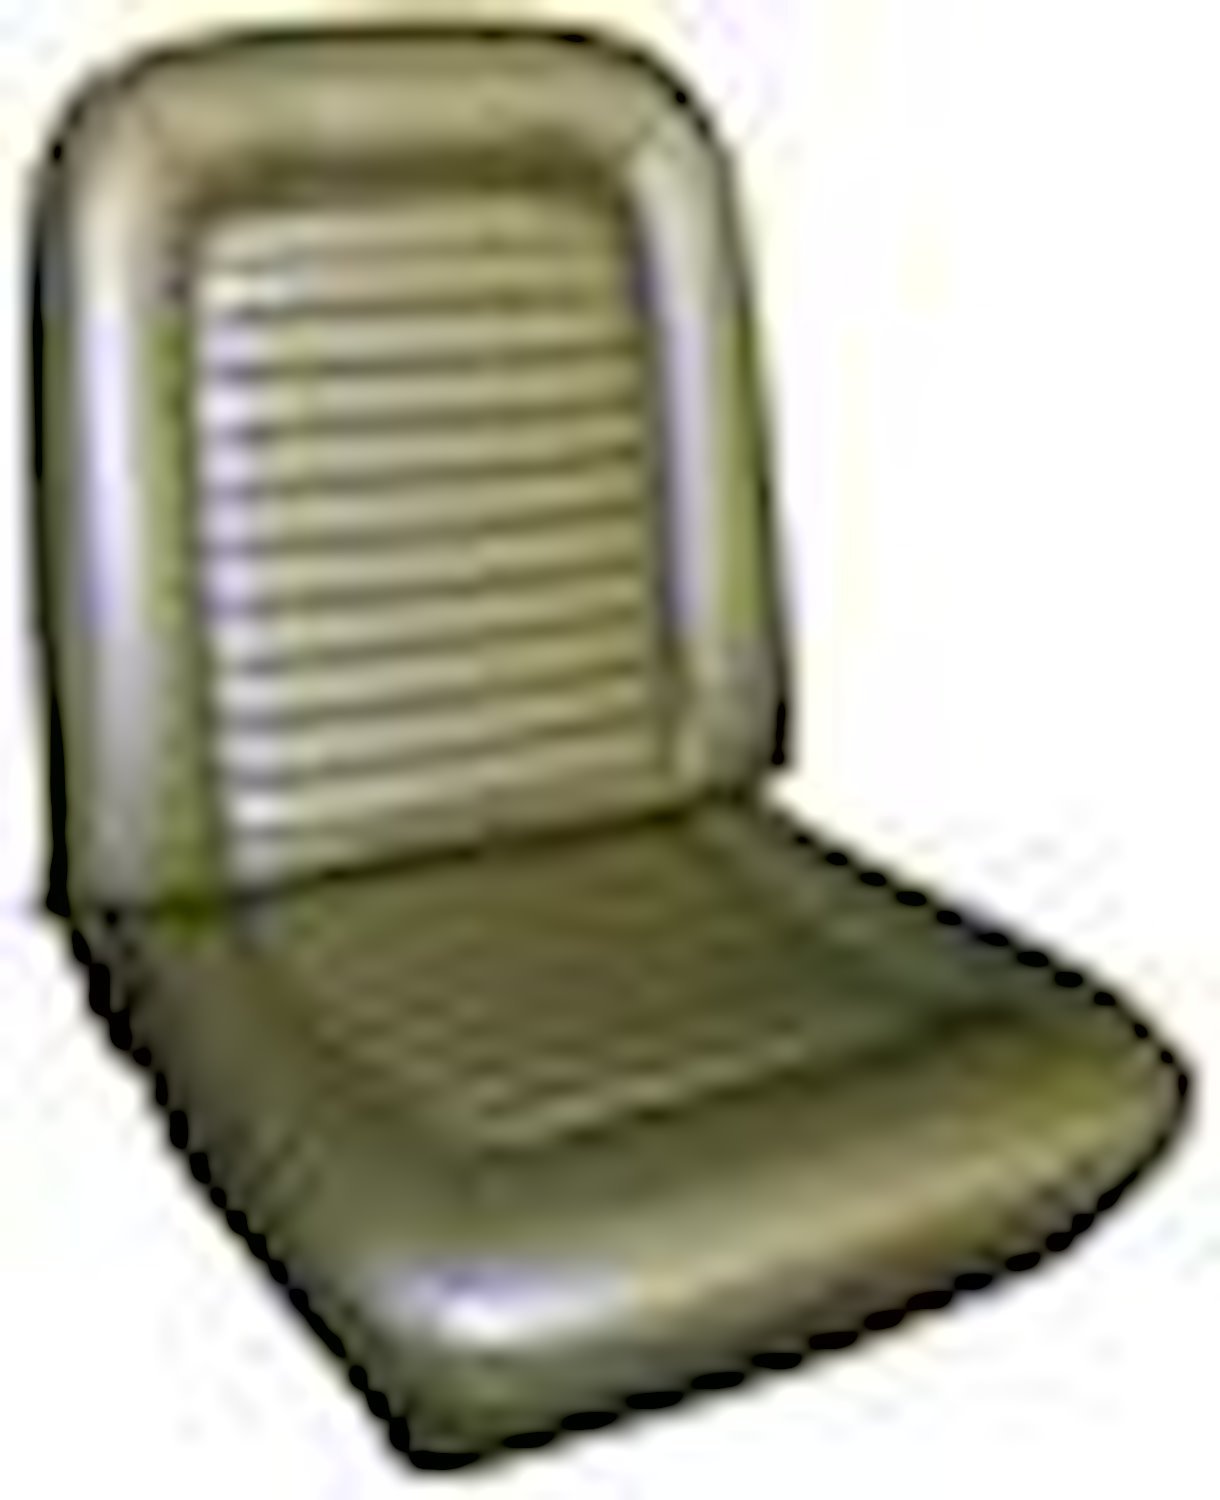 1965-1966 Ford Mustang Convertible Standard Interior Touring Style Front Bucket and Rear Bench Seat Upholstery Set